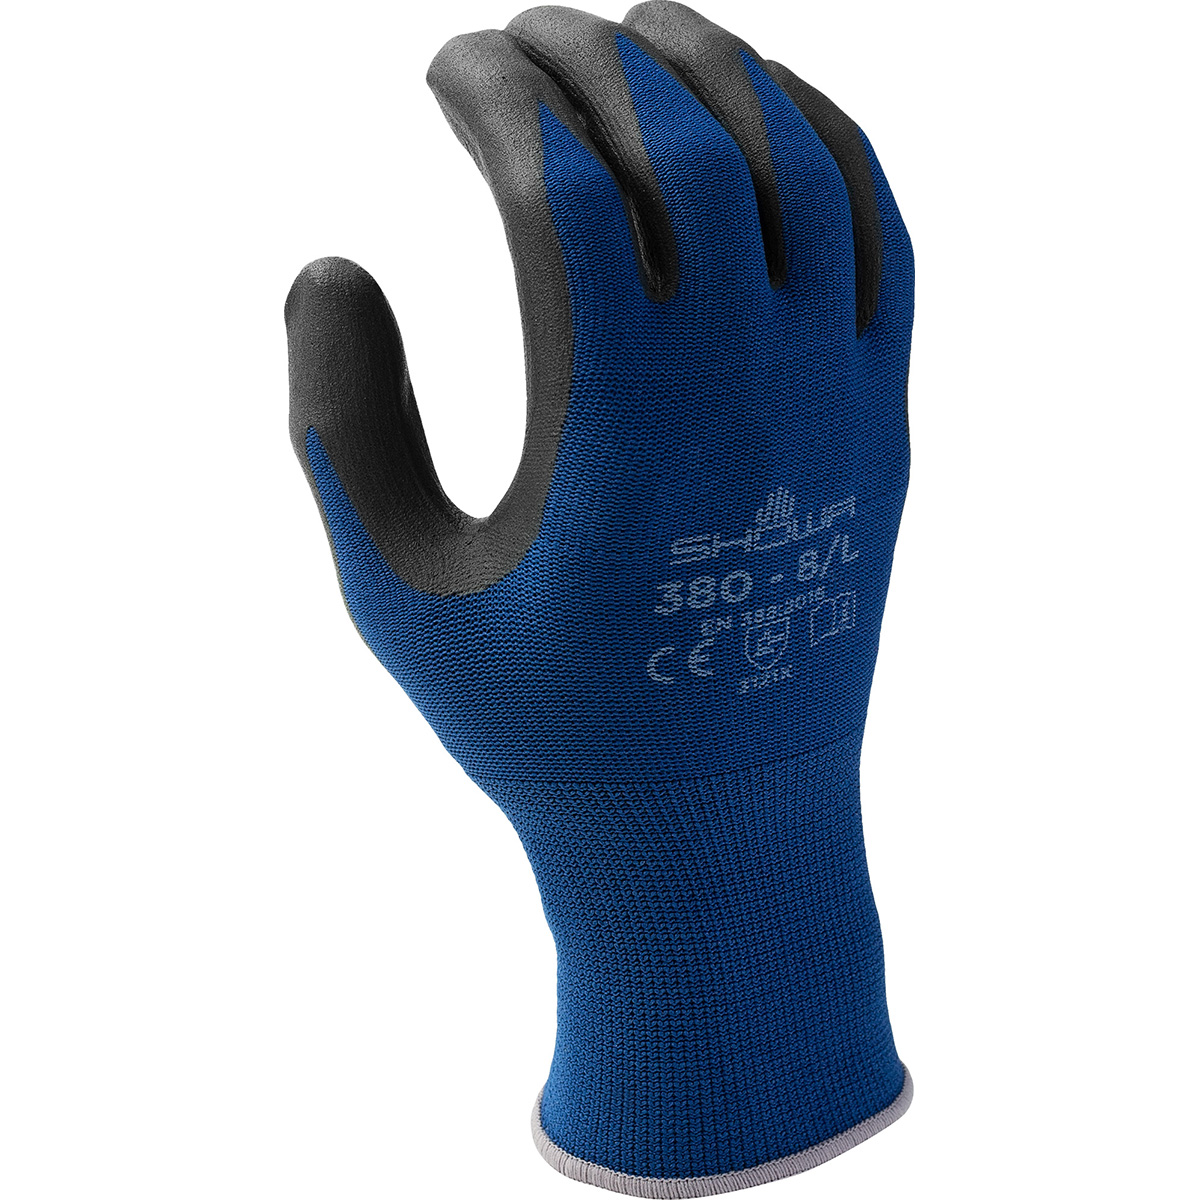 General purpose patented waffle pattern foamed nitrile-coated, palm dipped, blue w/black coating, 13 gauge seamless, knitted liner, extra large